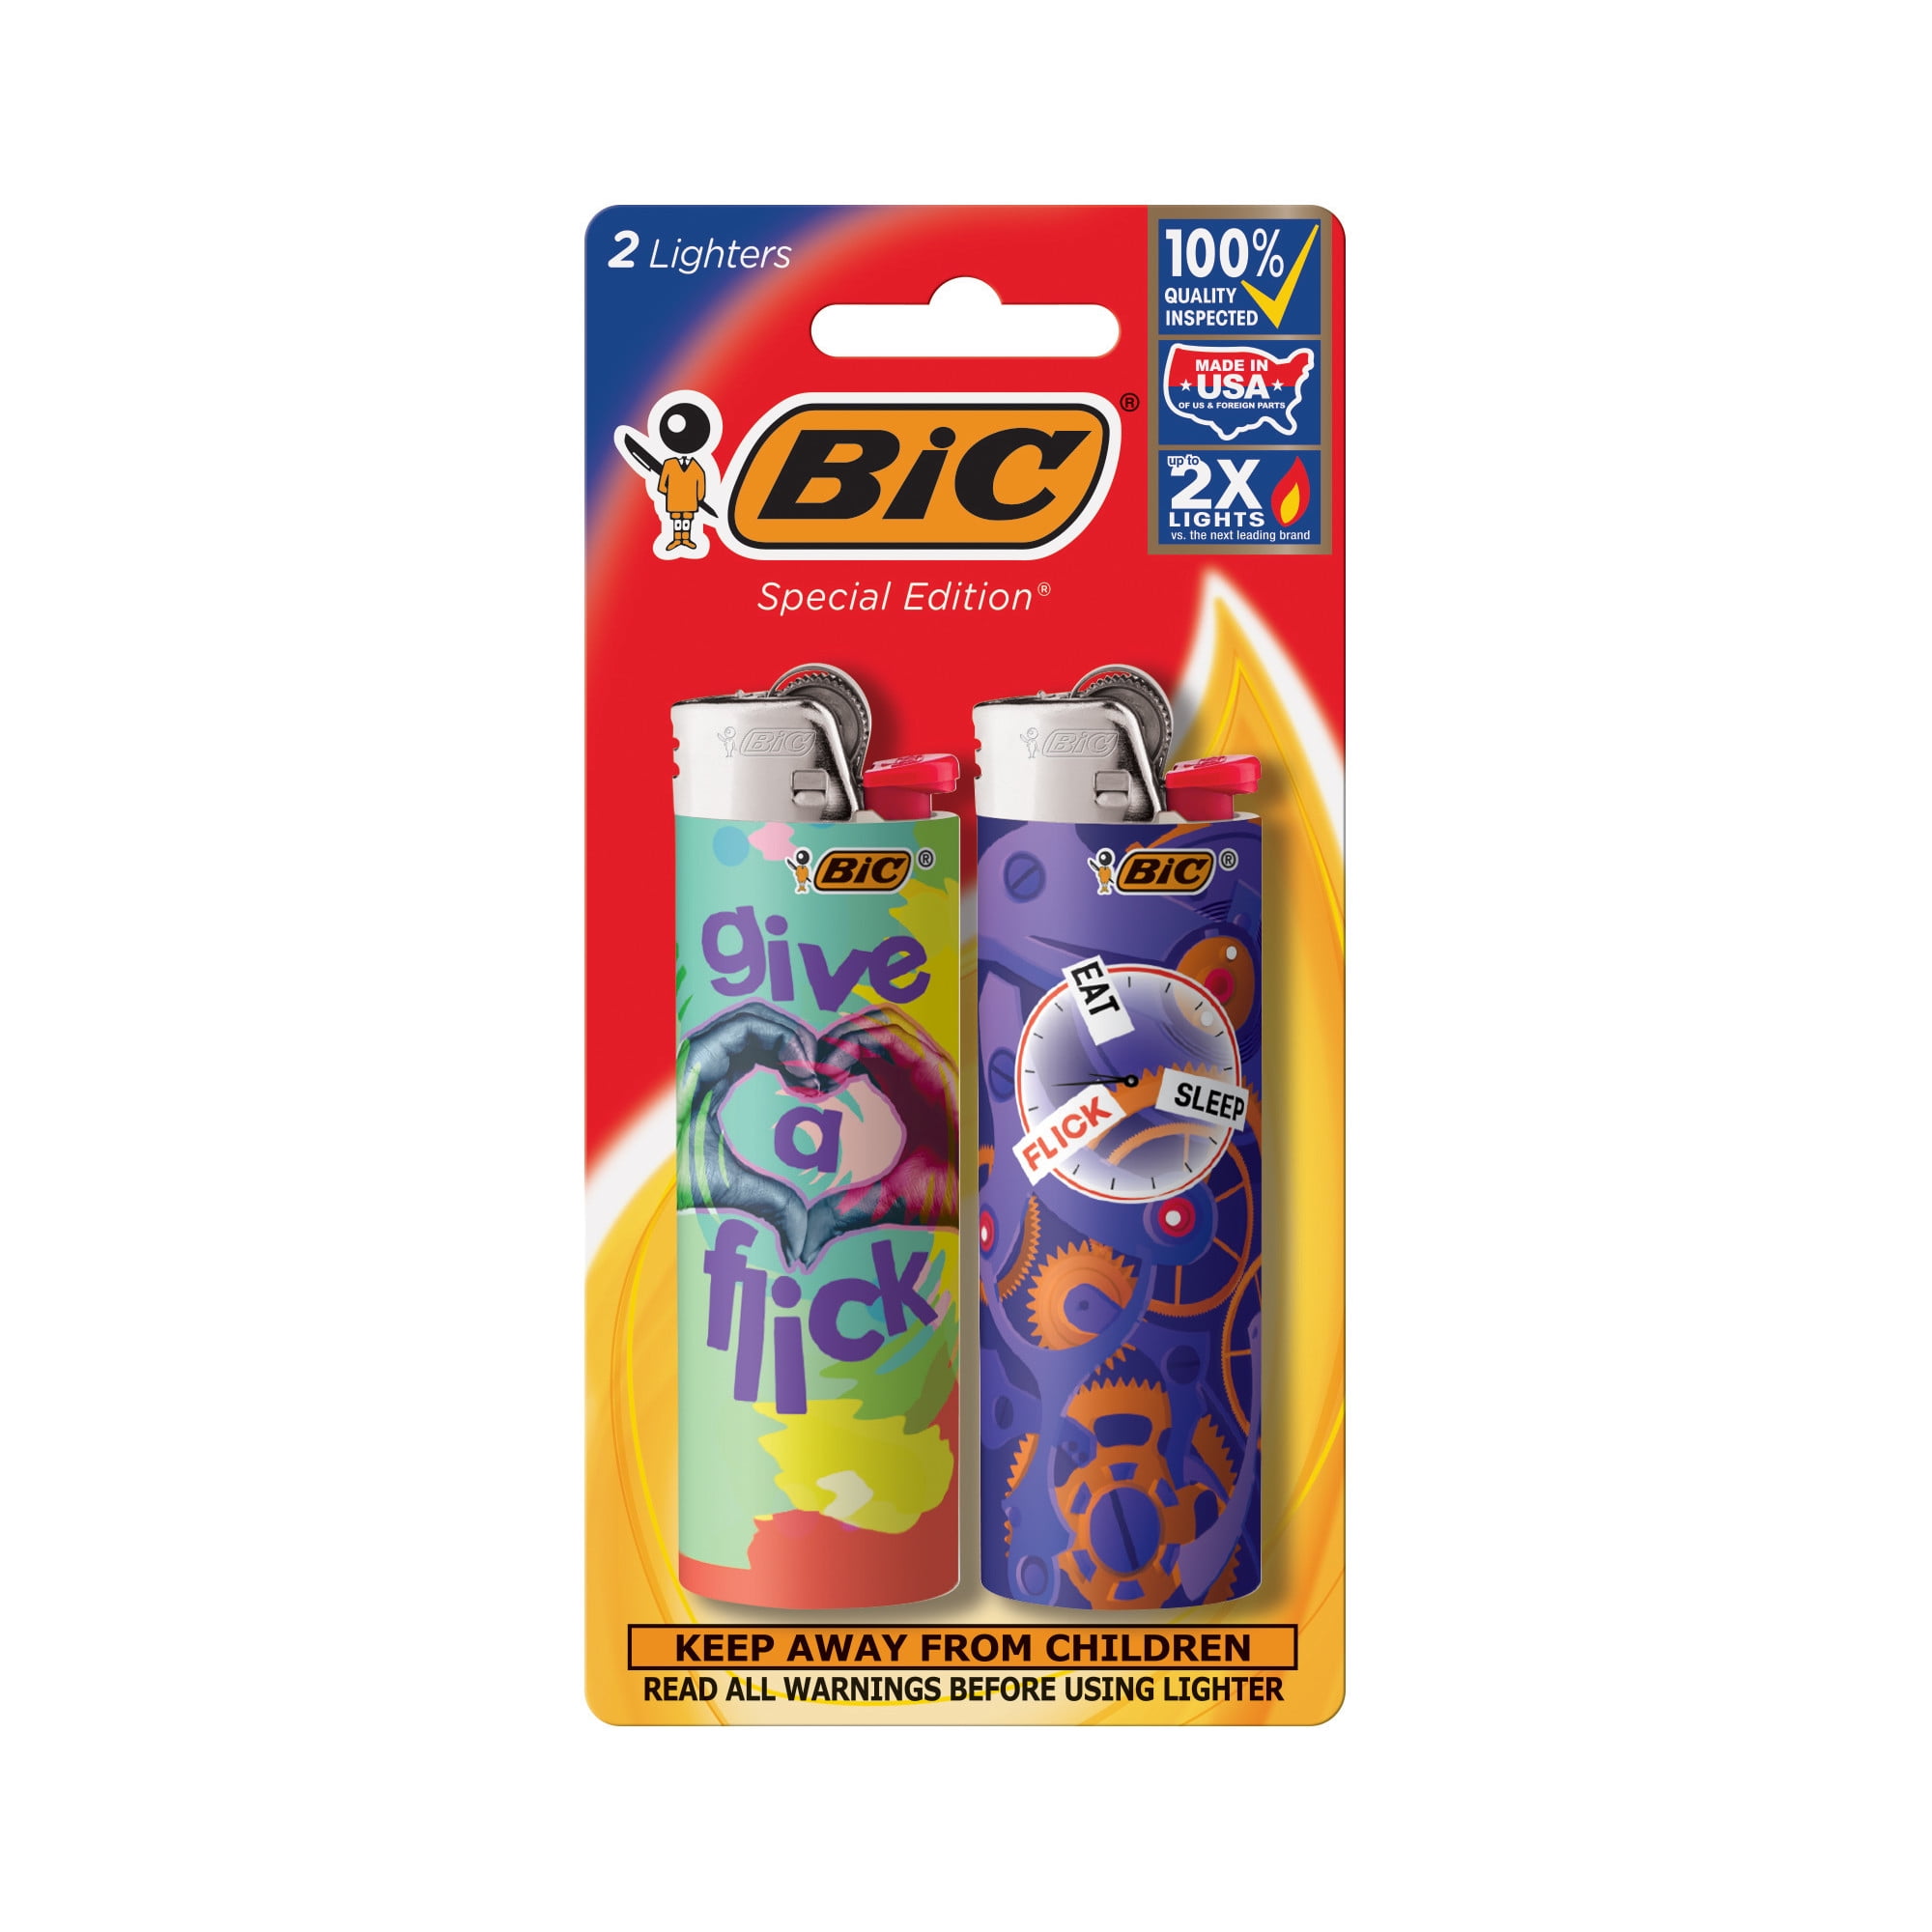 BIC Special Pocket Lighter, Flick My BIC Series -- Pack of 2 Lighters (designs may vary) - Walmart.com